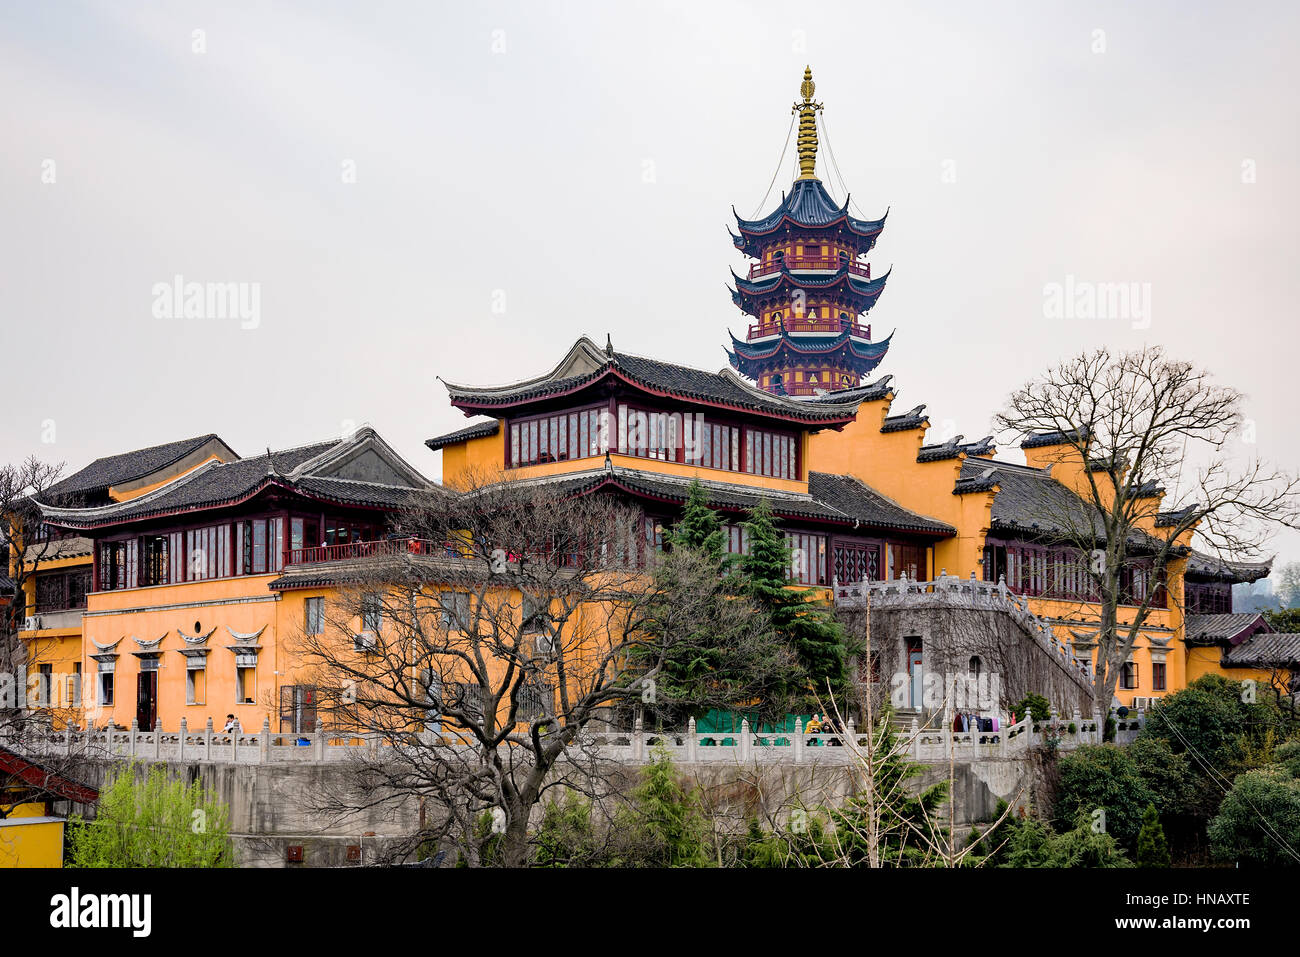 NANJING, CHINA- MARCH 17: Jiming temple is an ancient temple which has recently been restored and now is now a popular tourist site on March 17, 2016  Stock Photo